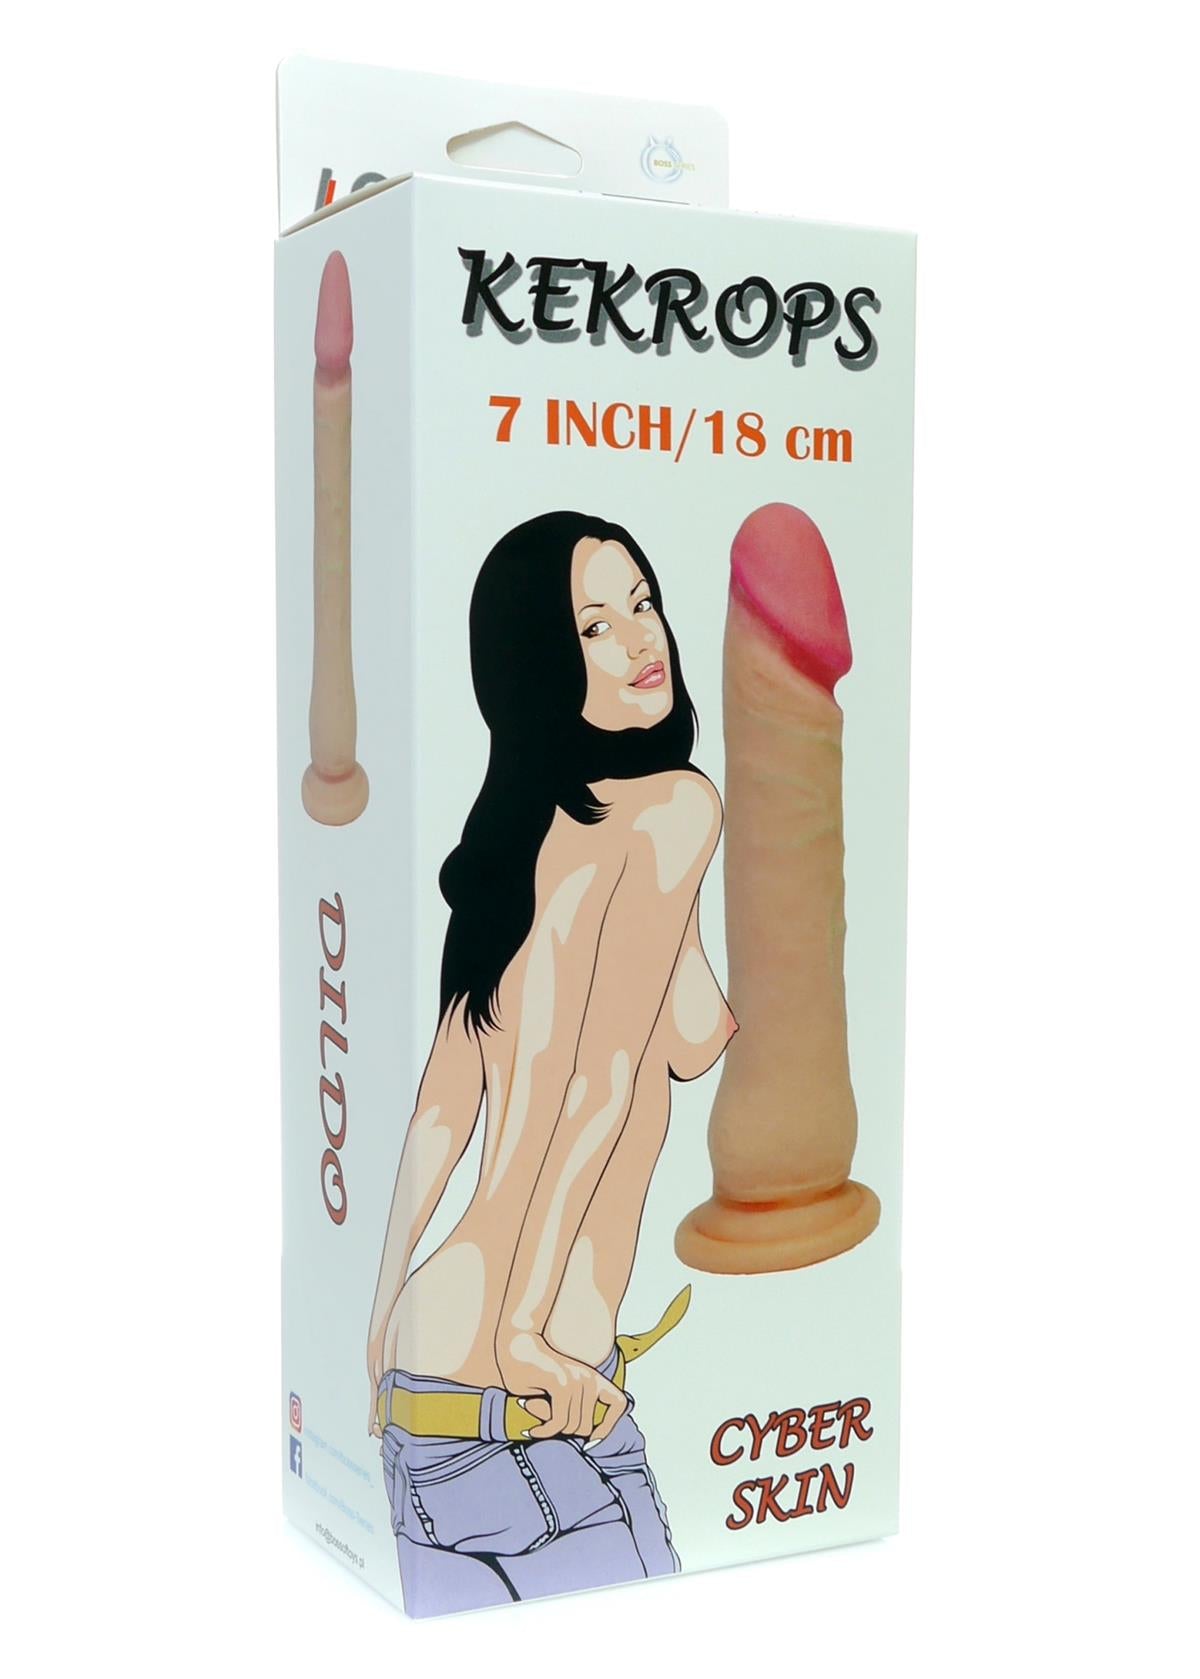 Bossoftoys Kekrops Loveclonex Ultra Realistic Dildo - Cyber skin feels like real - Better then Silicone - 17,5 Cm Length - 21-00034